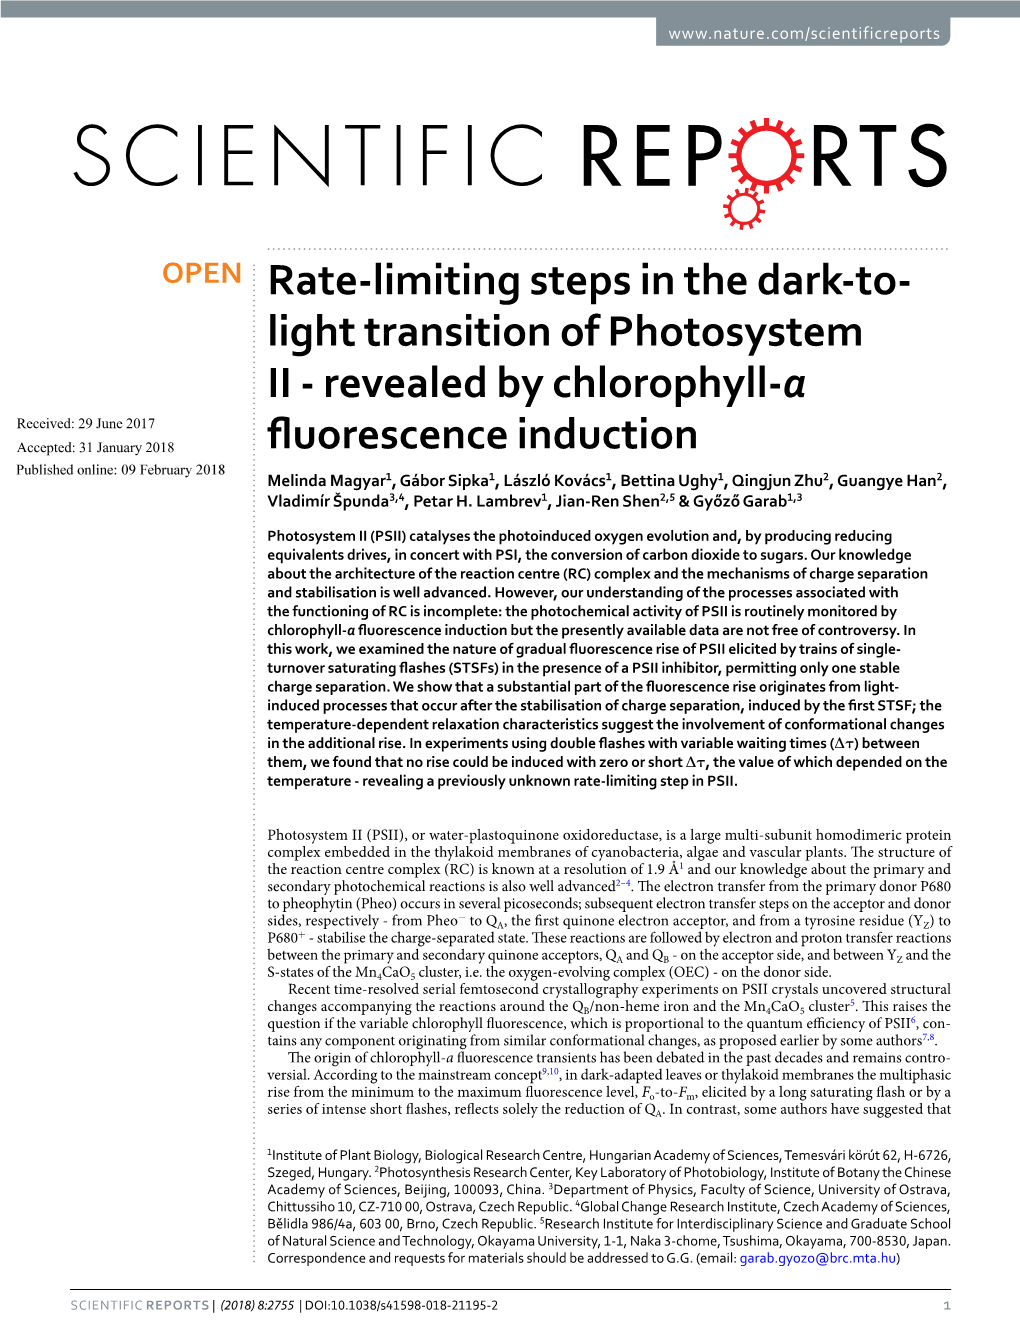 Rate-Limiting Steps in the Dark-To-Light Transition of Photosystem II